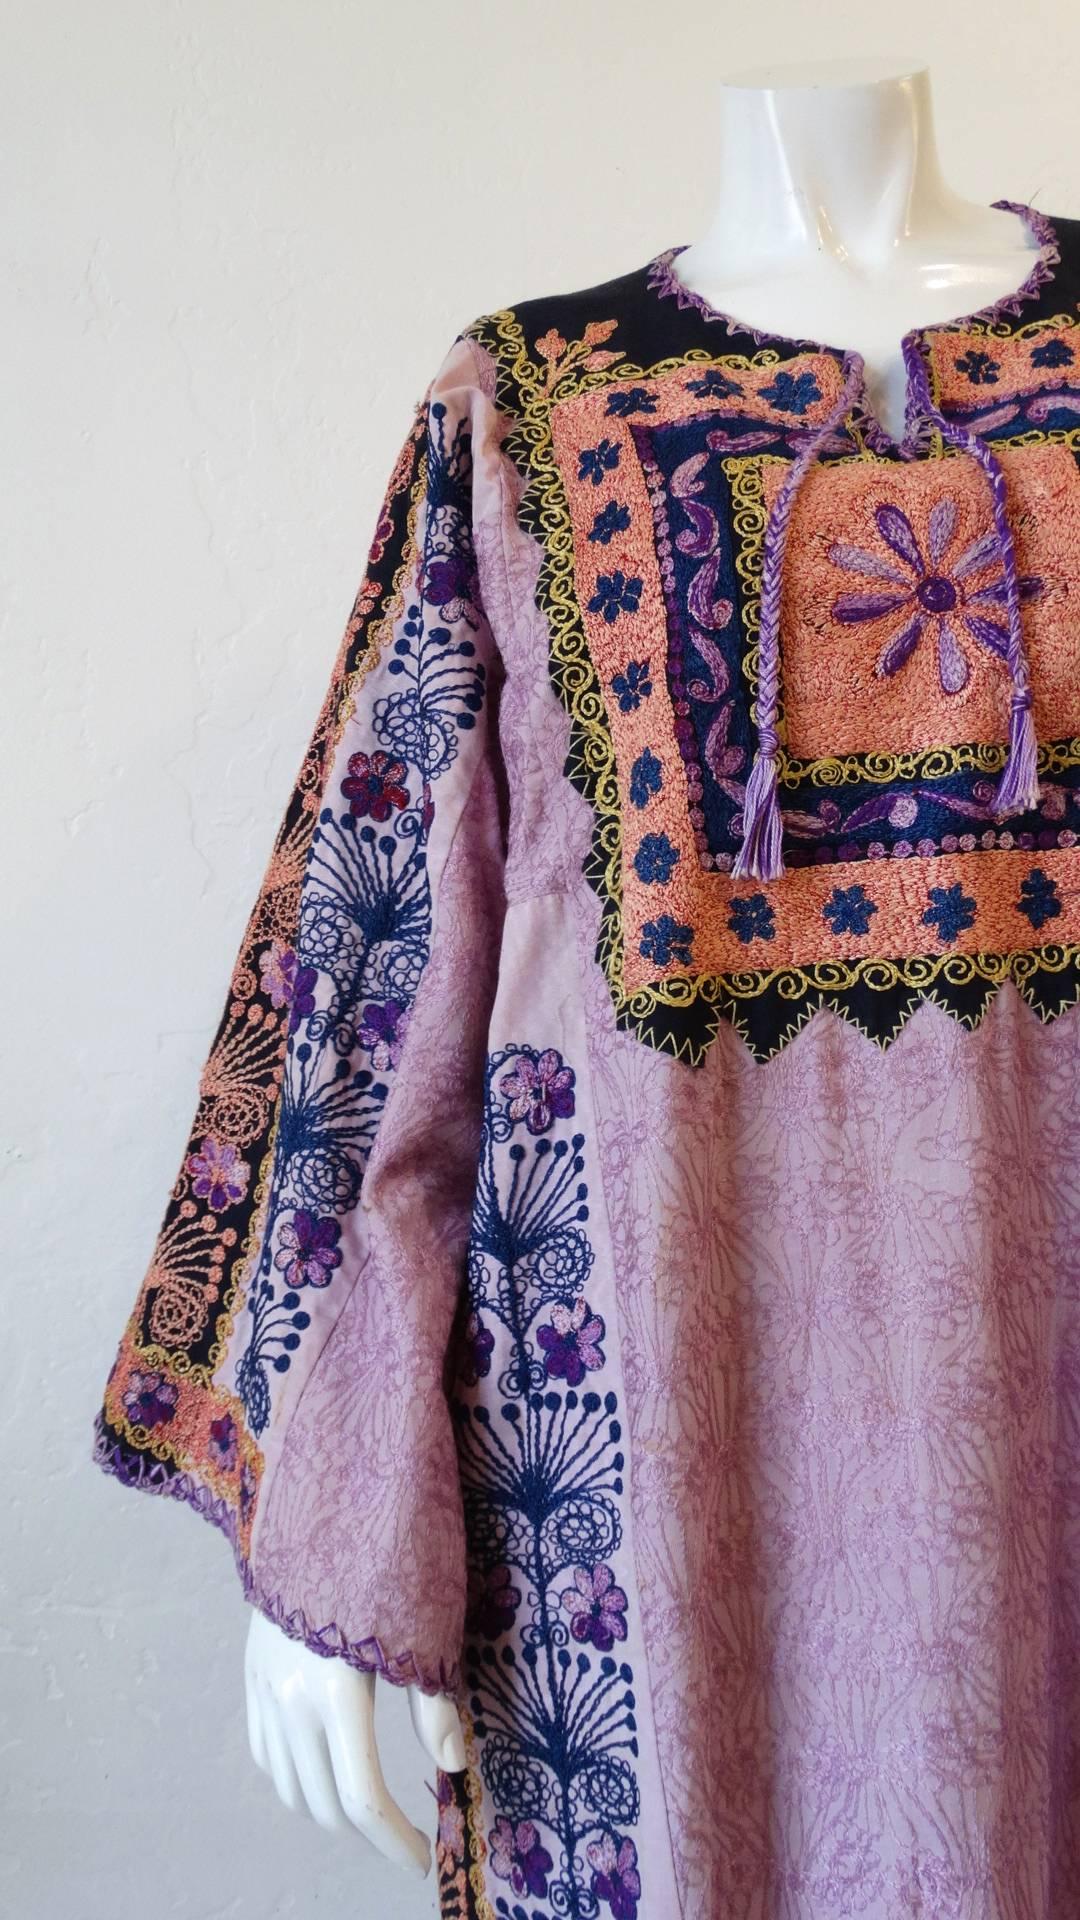 Incredible 1970s Bedouin embroidered kaftan dress! Made of a breezy cotton fabric and embroidered all over with an intricate floral inspired pattern! Oversized, kaftan fit with long flared sleeves. The perfect piece to throw on with your favorite